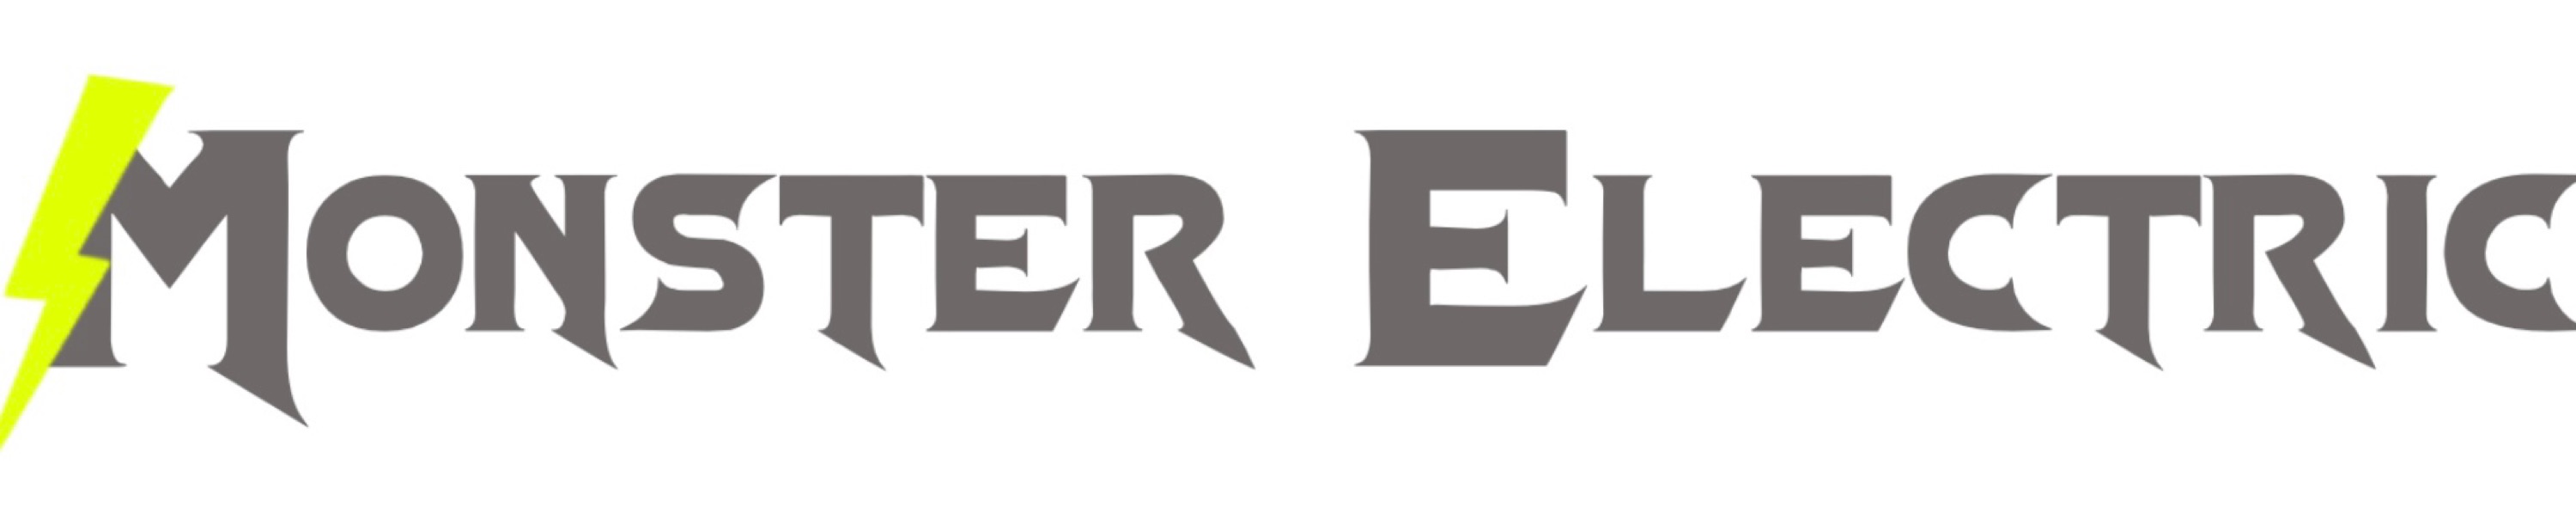 Monster Electric Corp. Logo